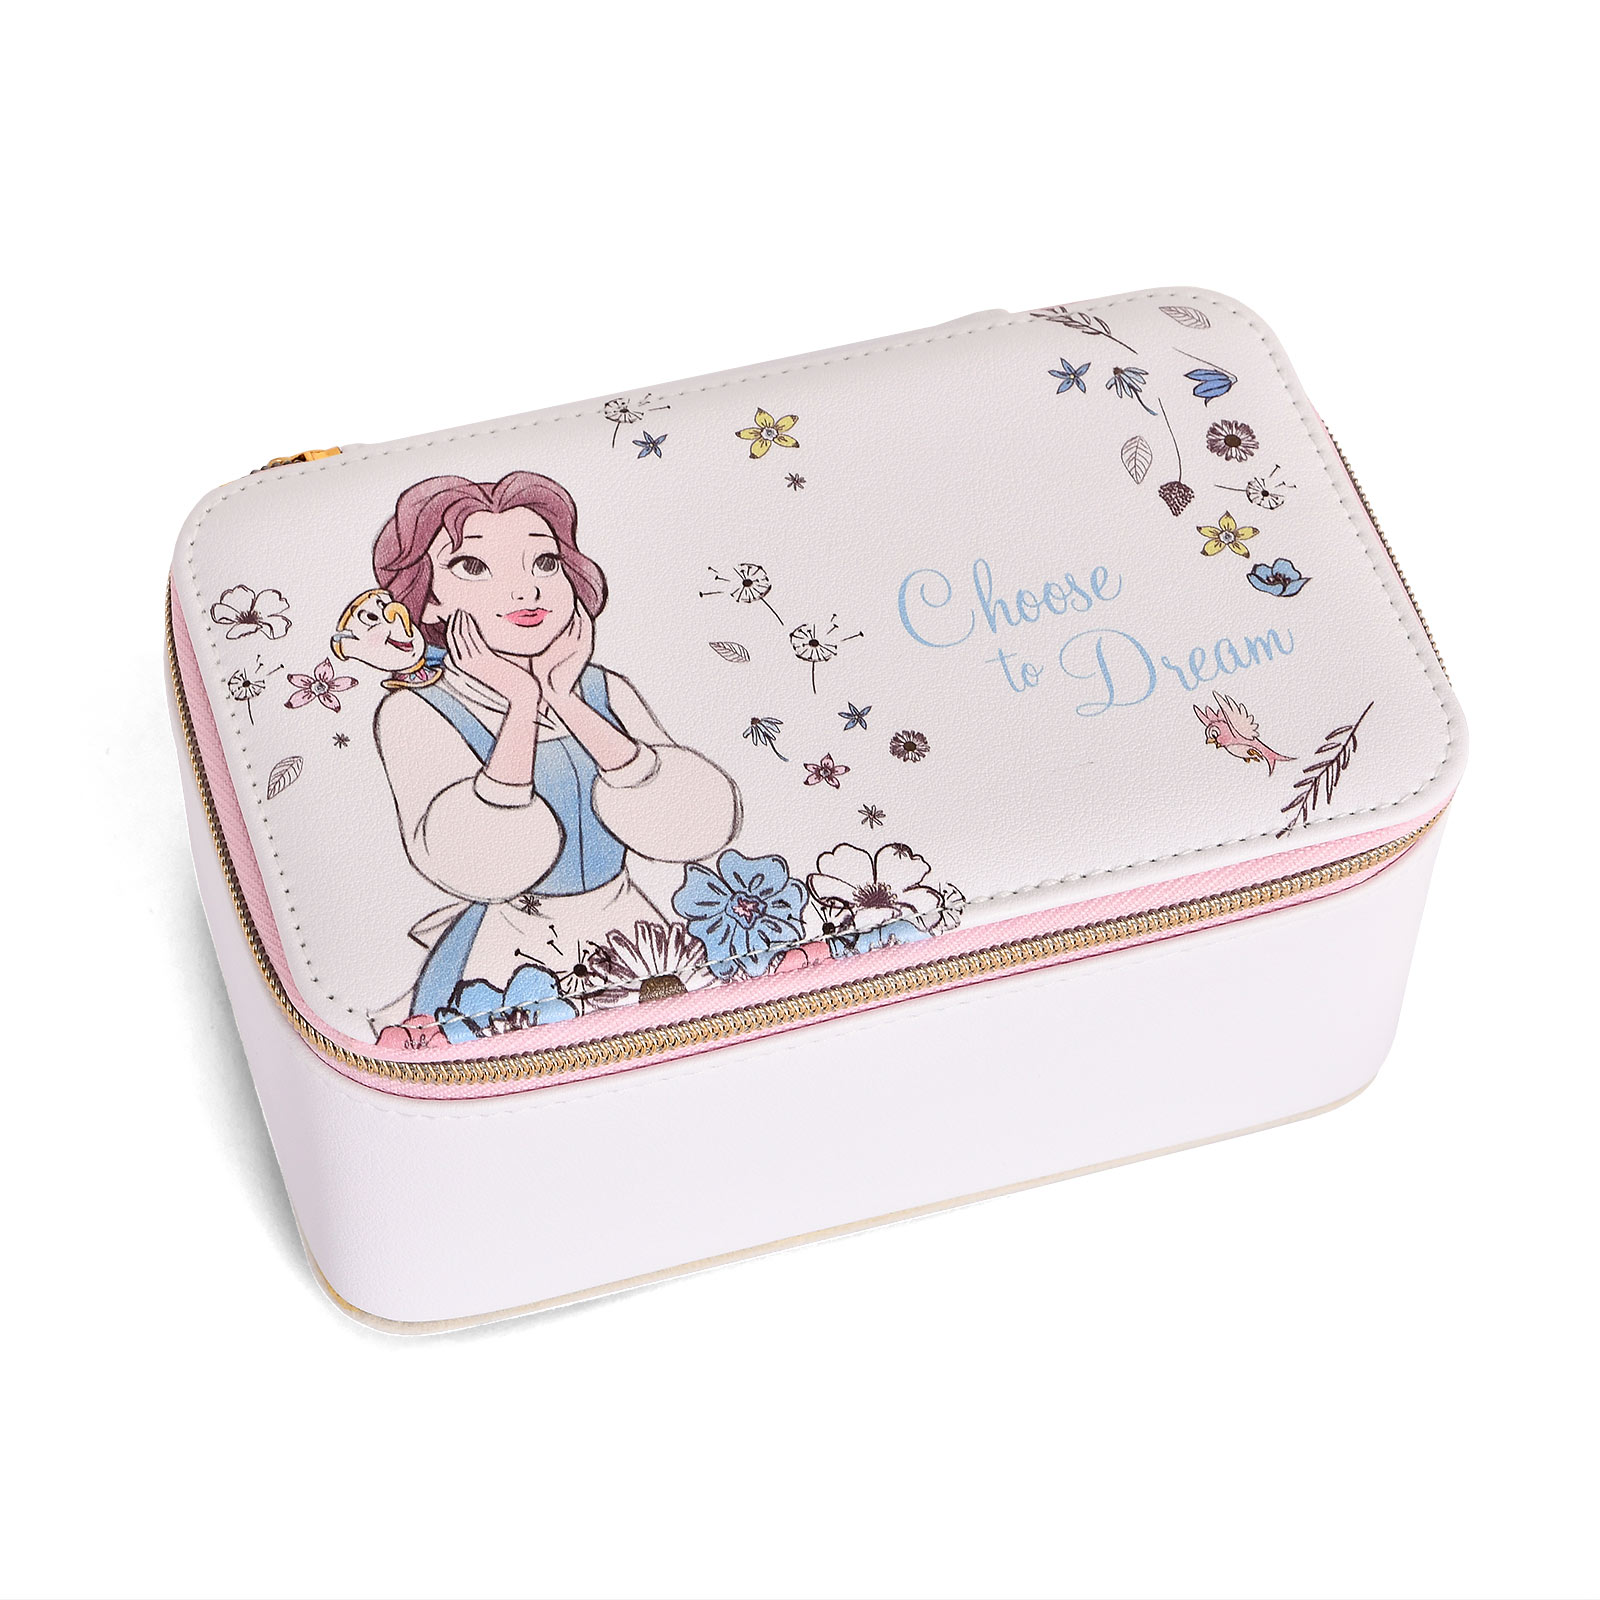 Beauty and the Beast - Belle Choose to Dream Jewelry Box